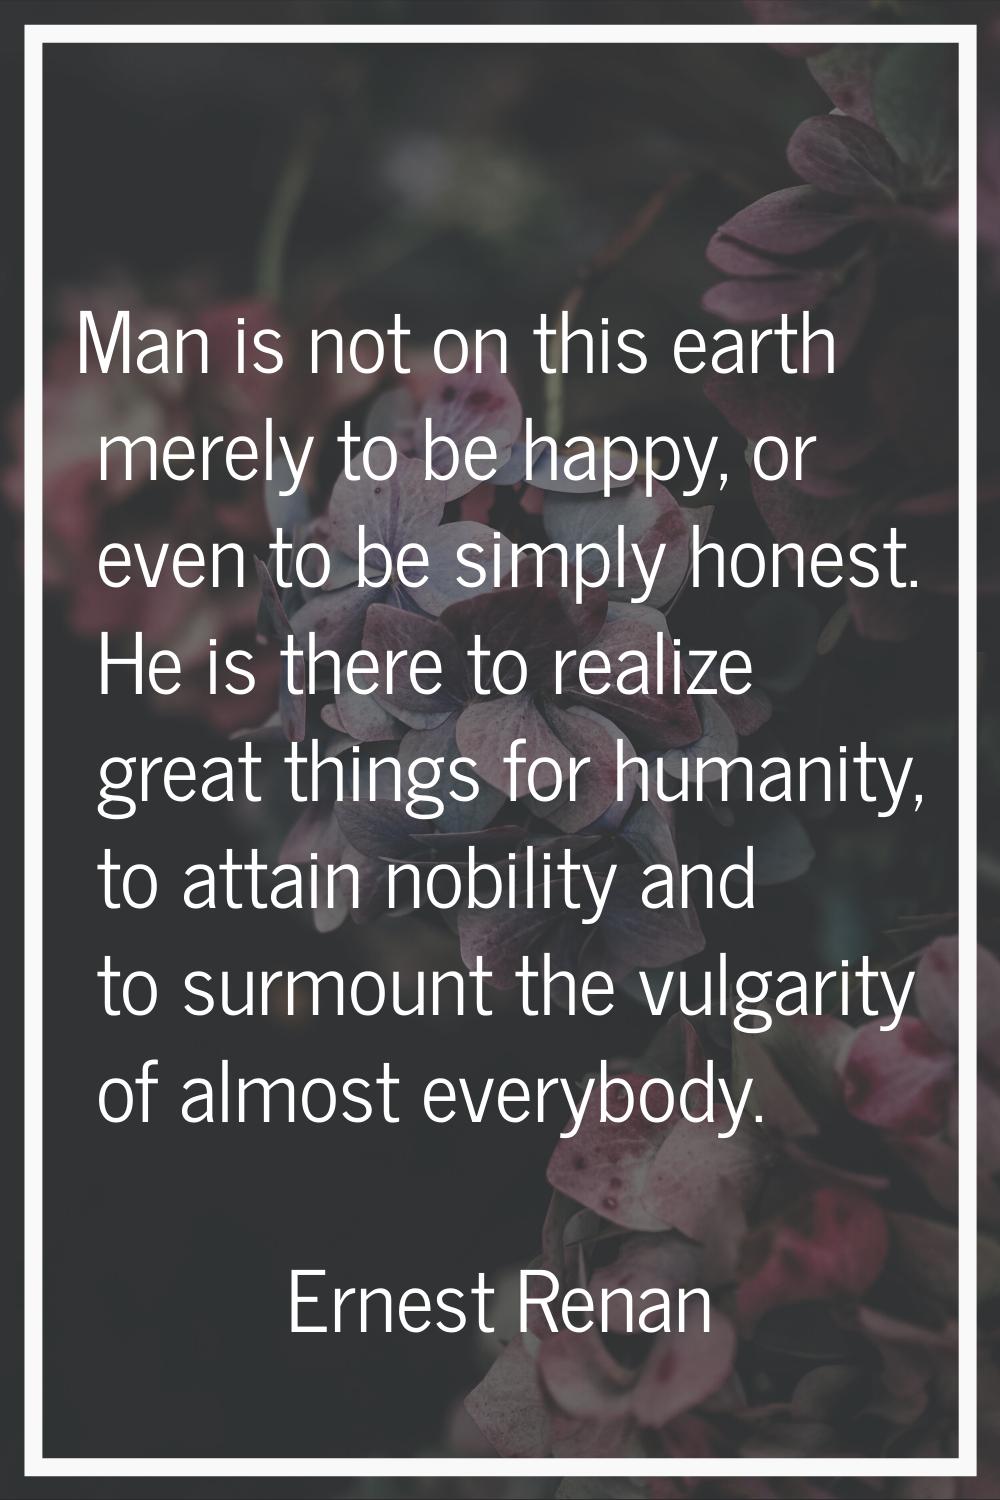 Man is not on this earth merely to be happy, or even to be simply honest. He is there to realize gr